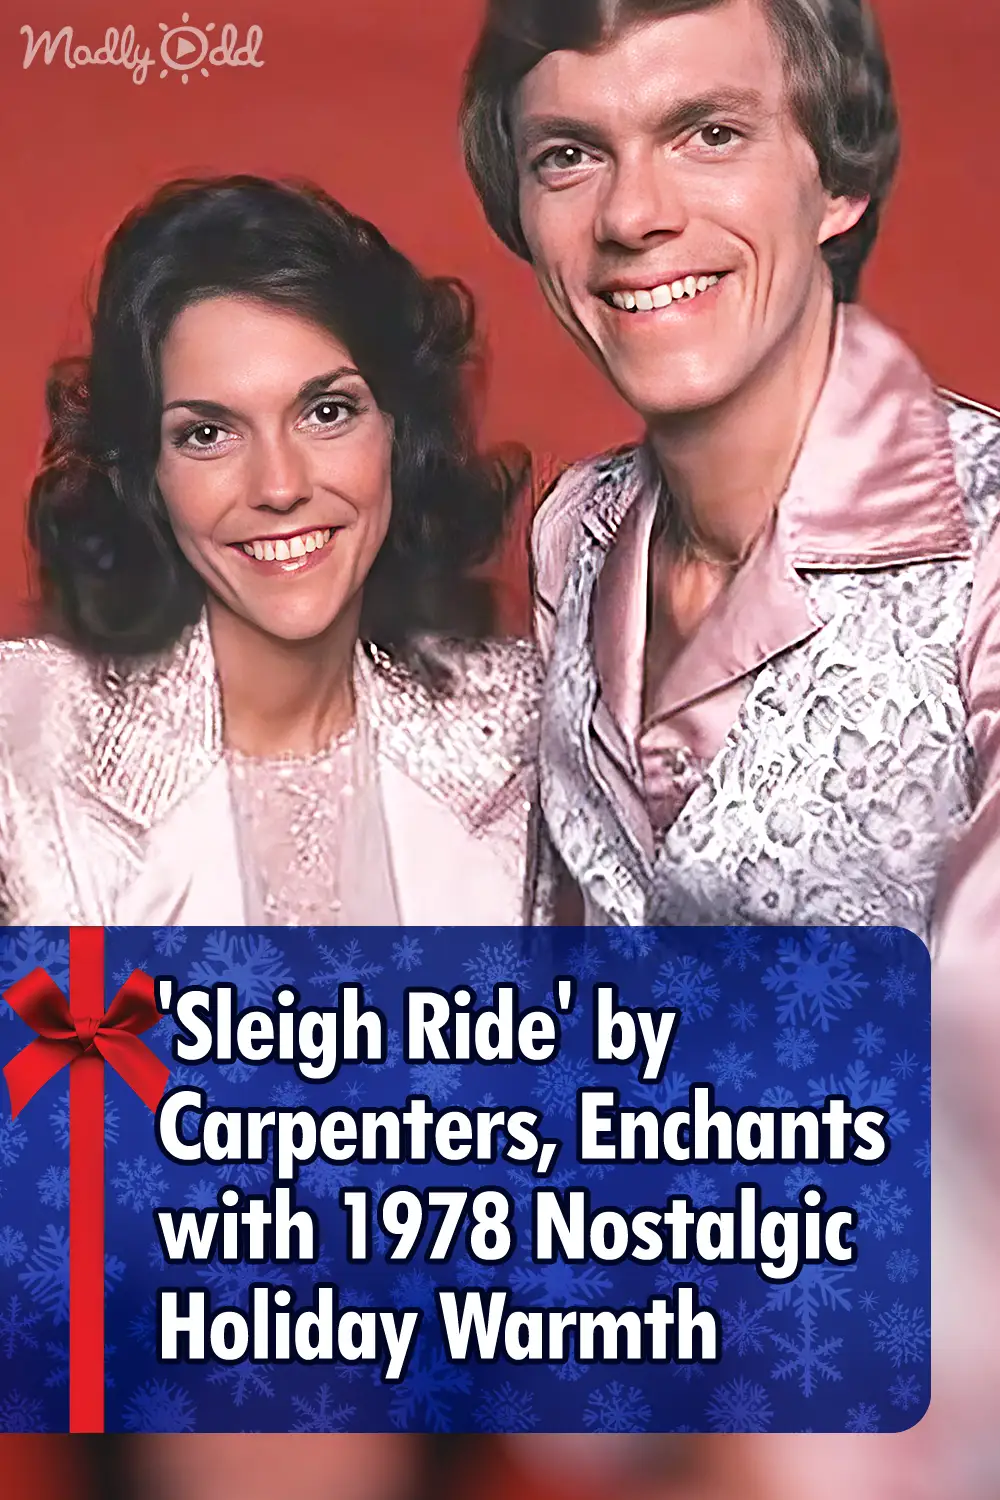 \'Sleigh Ride\' by Carpenters, Enchants with 1978 Nostalgic Holiday Warmth